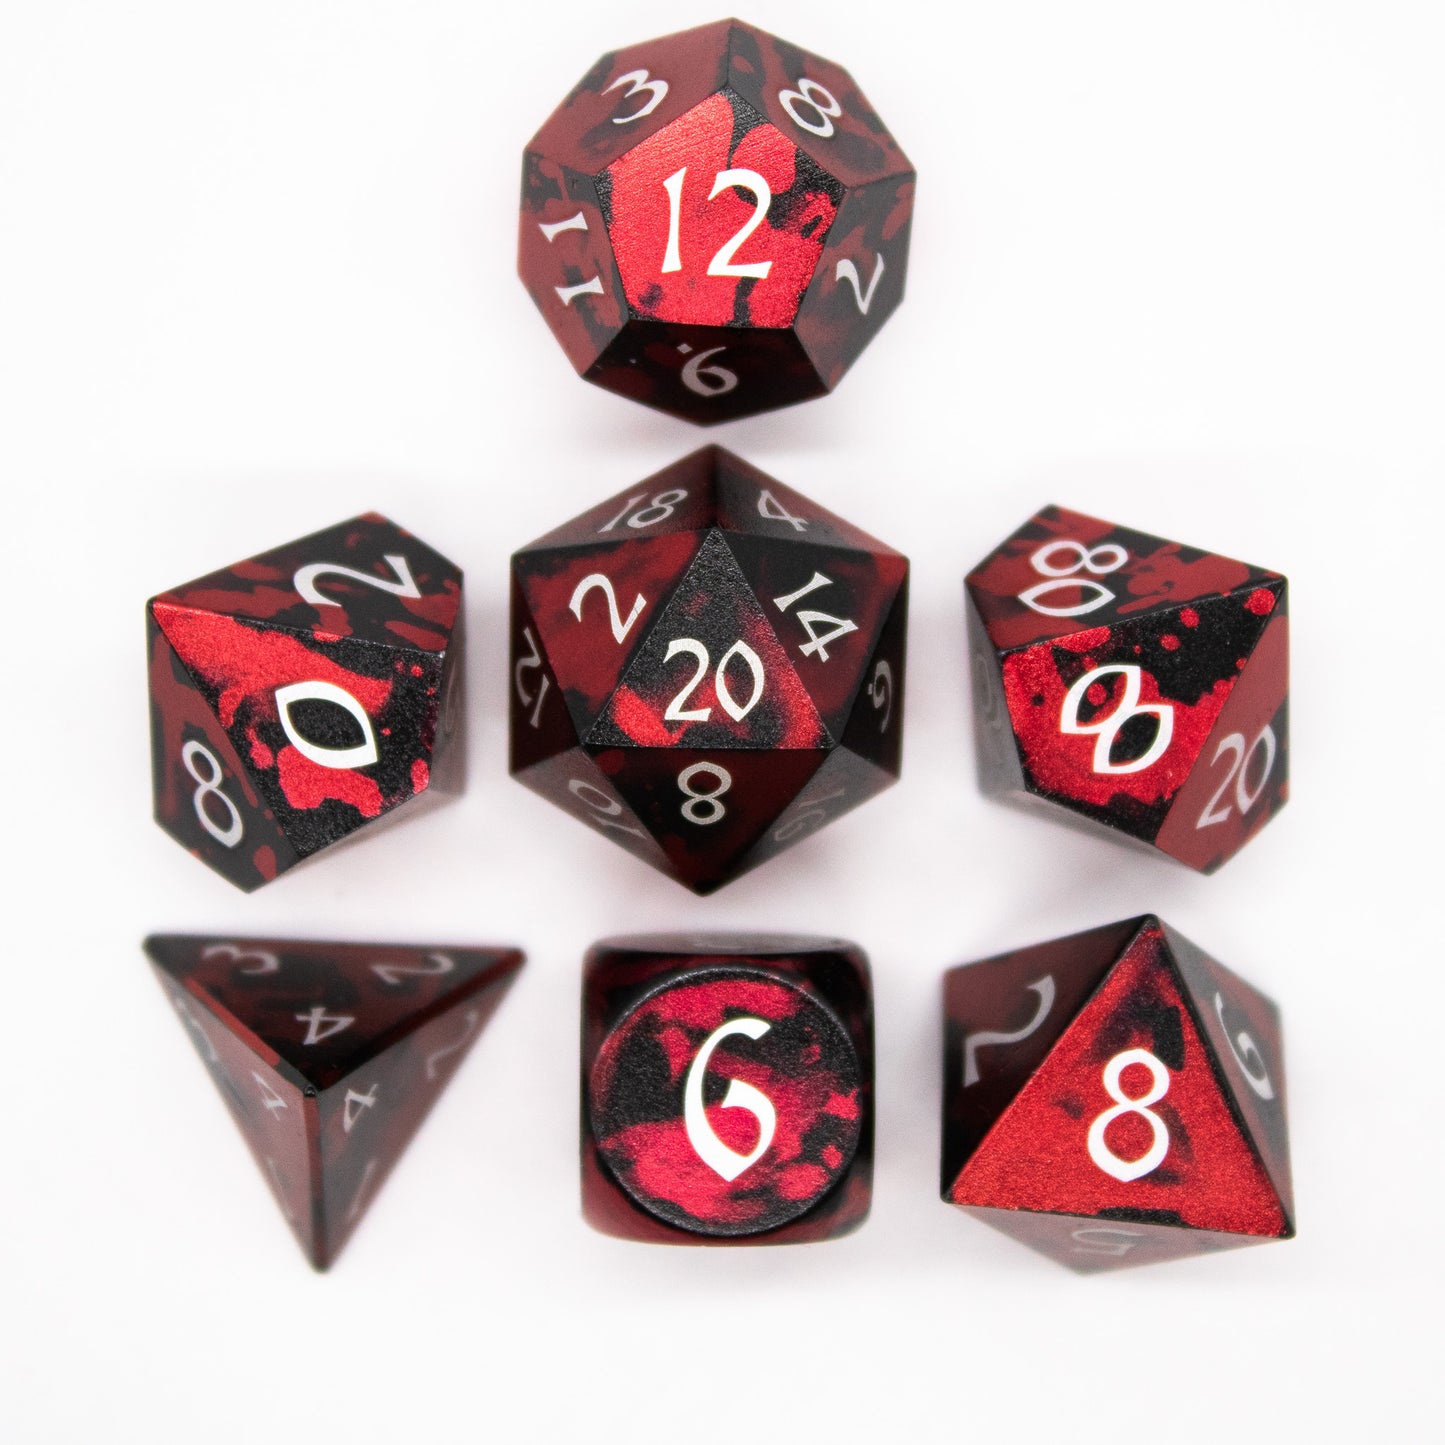 Anodized Aluminum - Red and Black